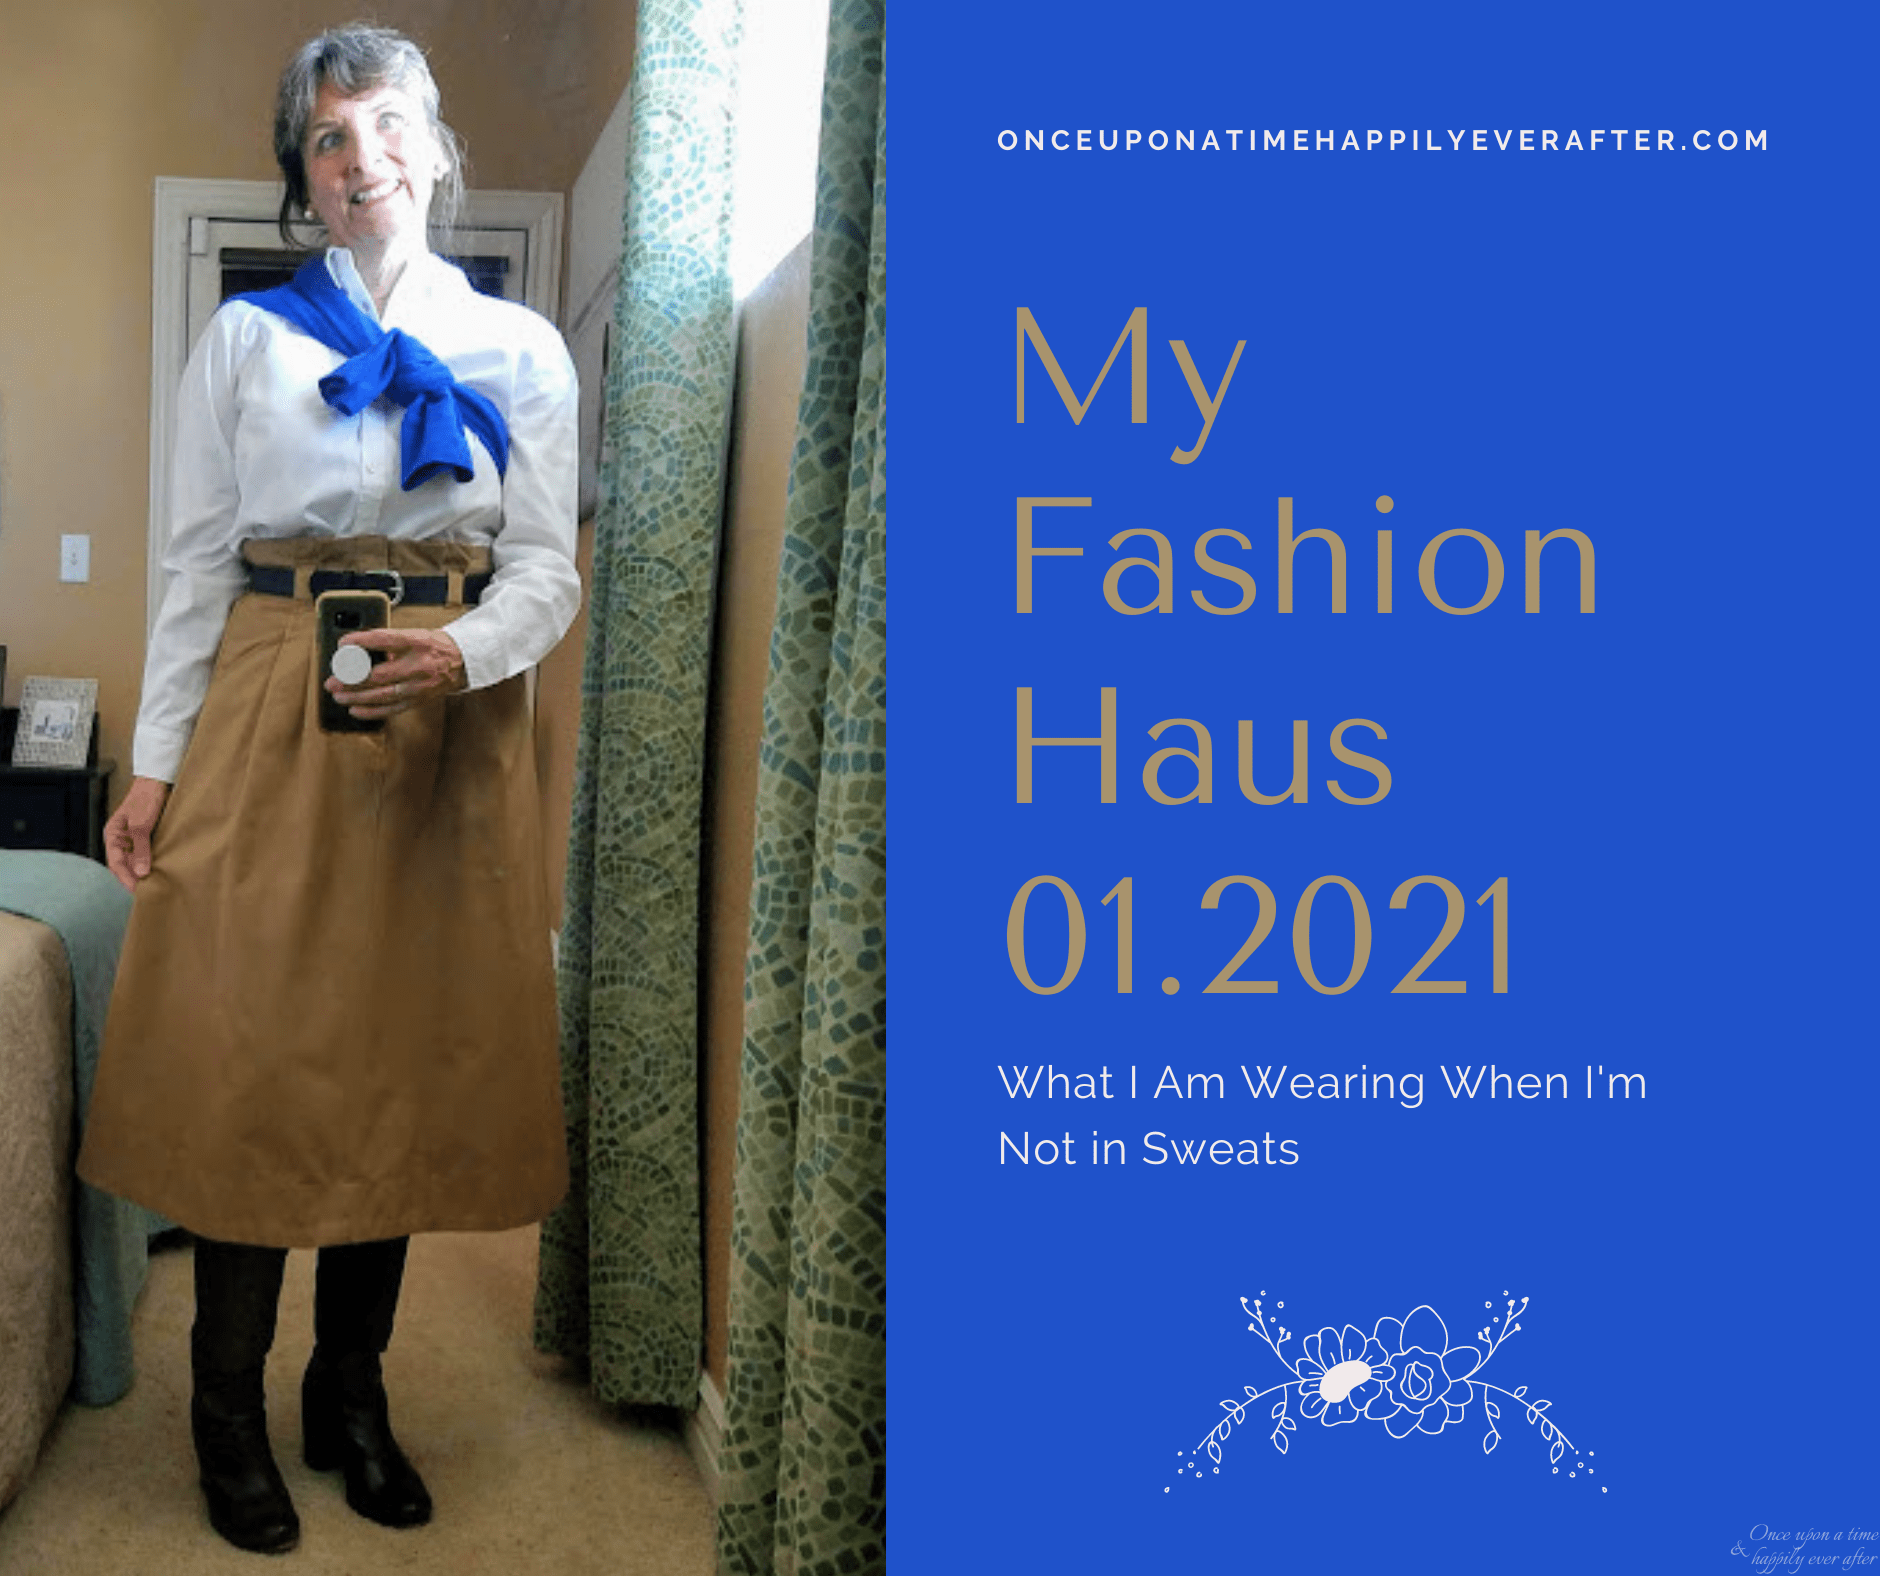 My Fashion Haus 01.2021: What I'm Wearing When I'm Not in Sweats